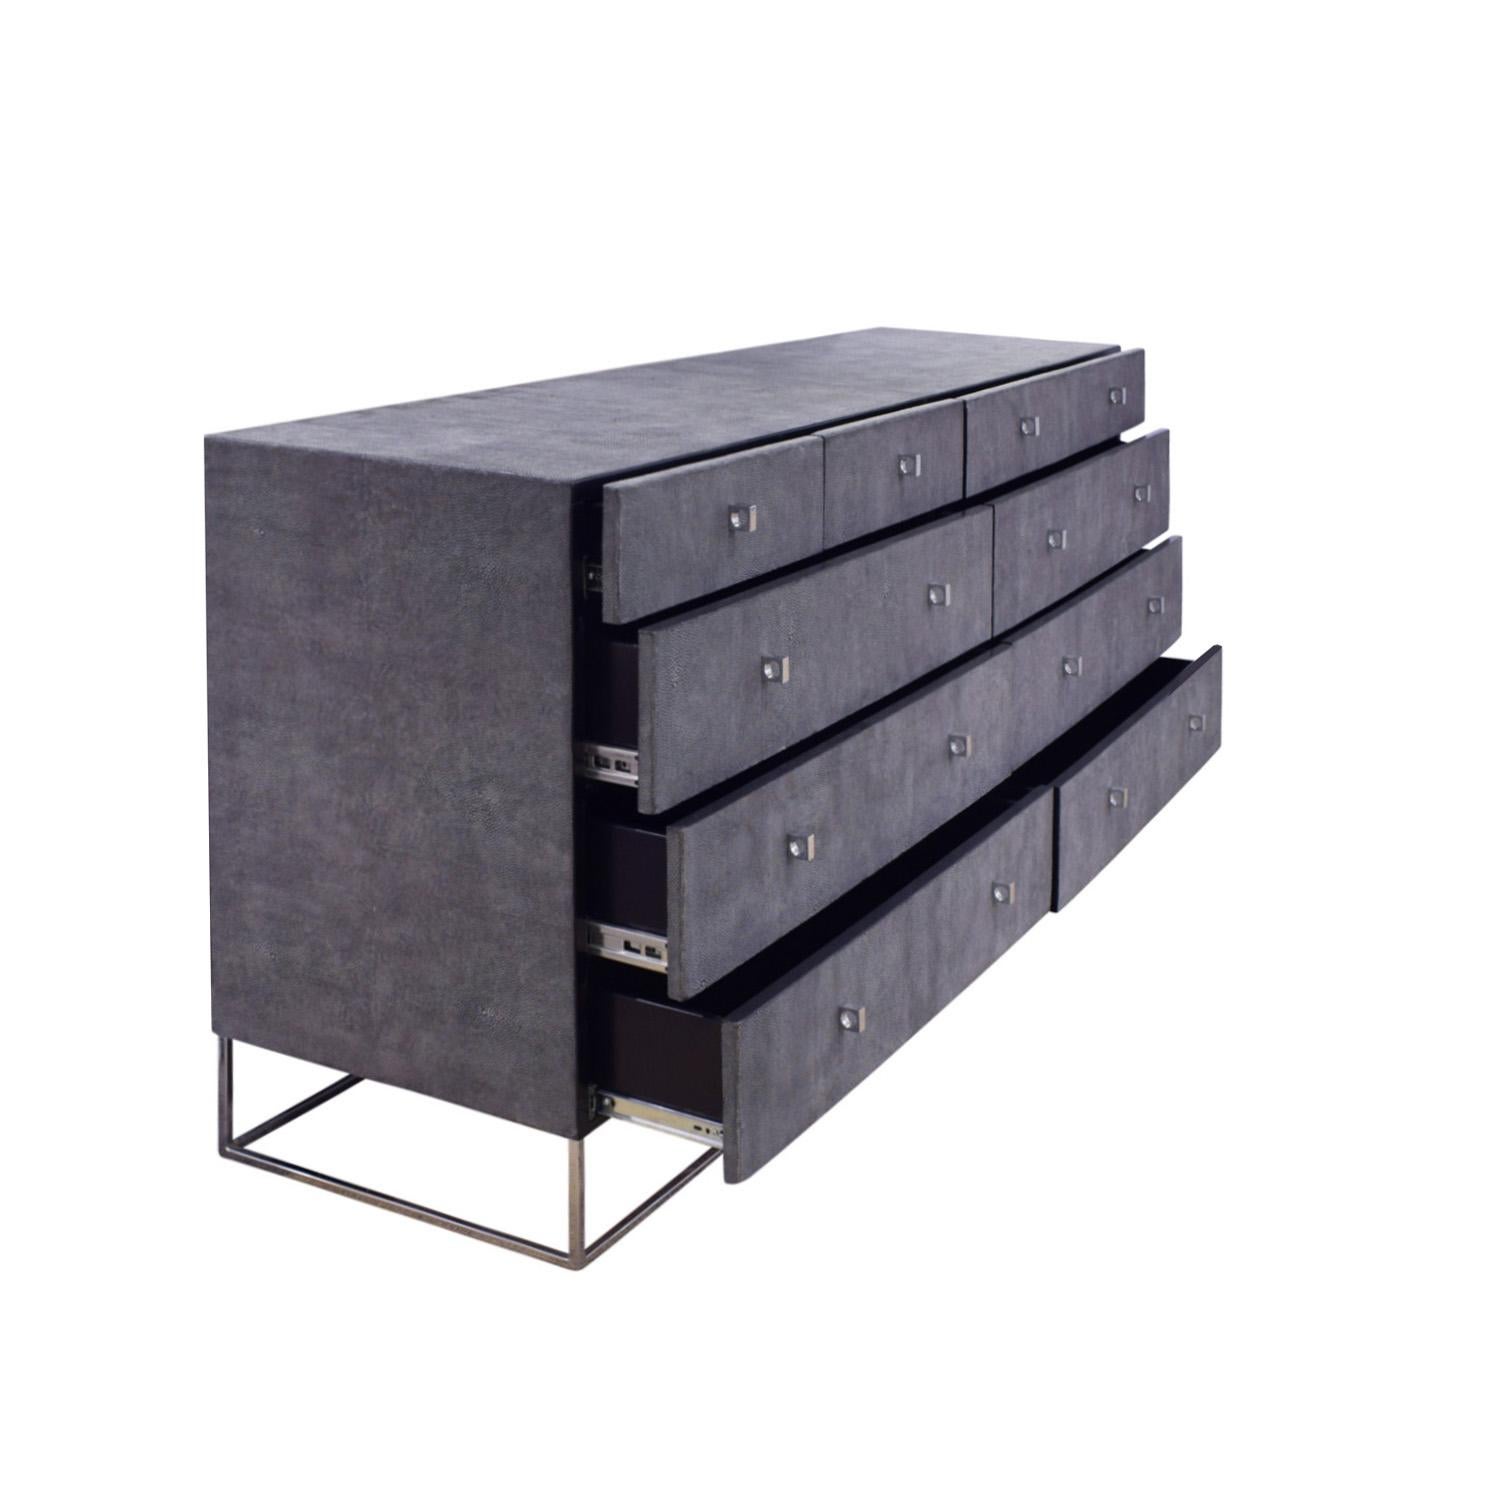 Chest of drawers in gray shagreen embossed leather with polished chrome base and pulls, custom design, American 1970’s. We have installed self-close glides. Interior of drawers lacquered black. A very chic design.  We have replaced the glides on the